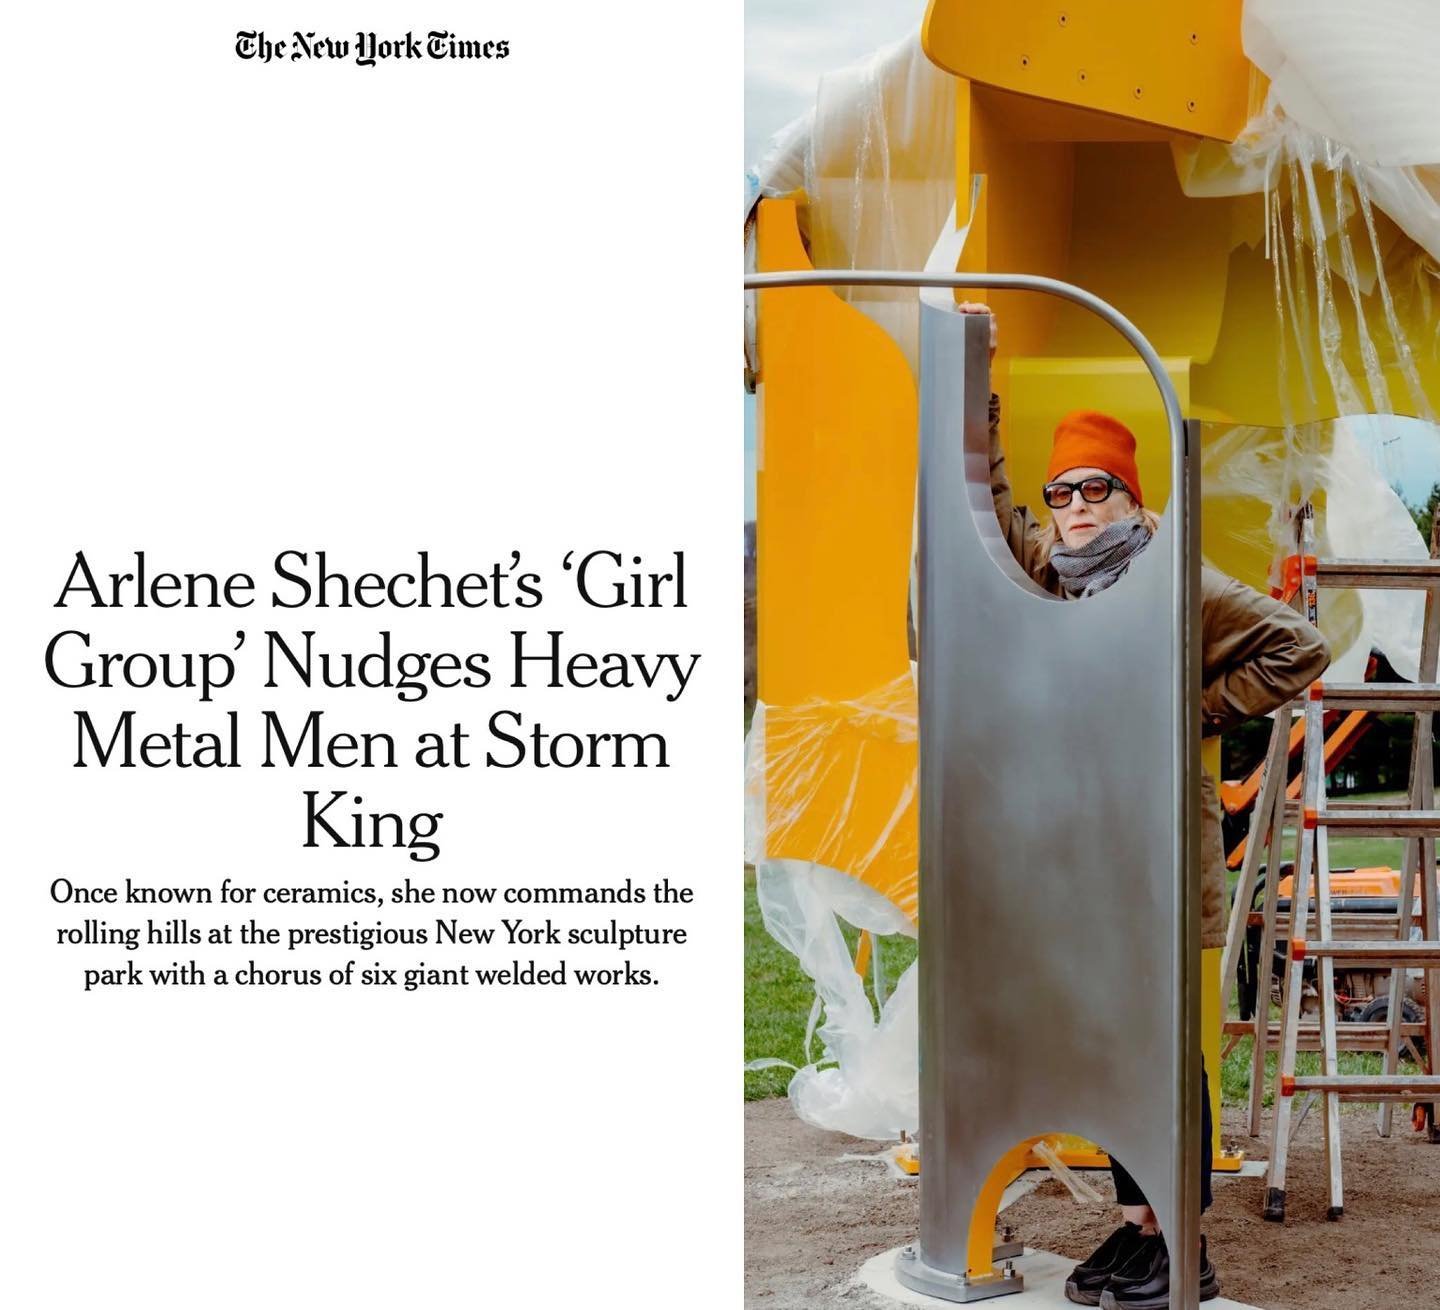 So excited for Arlene @arleneshechet following last week&rsquo;s opening of her incredible exhibition &ldquo;Girl Group&rdquo; at Storm King @stormkingartcenter. Thrilled to see a work from our client&rsquo;s collection both on exhibit and mentioned 